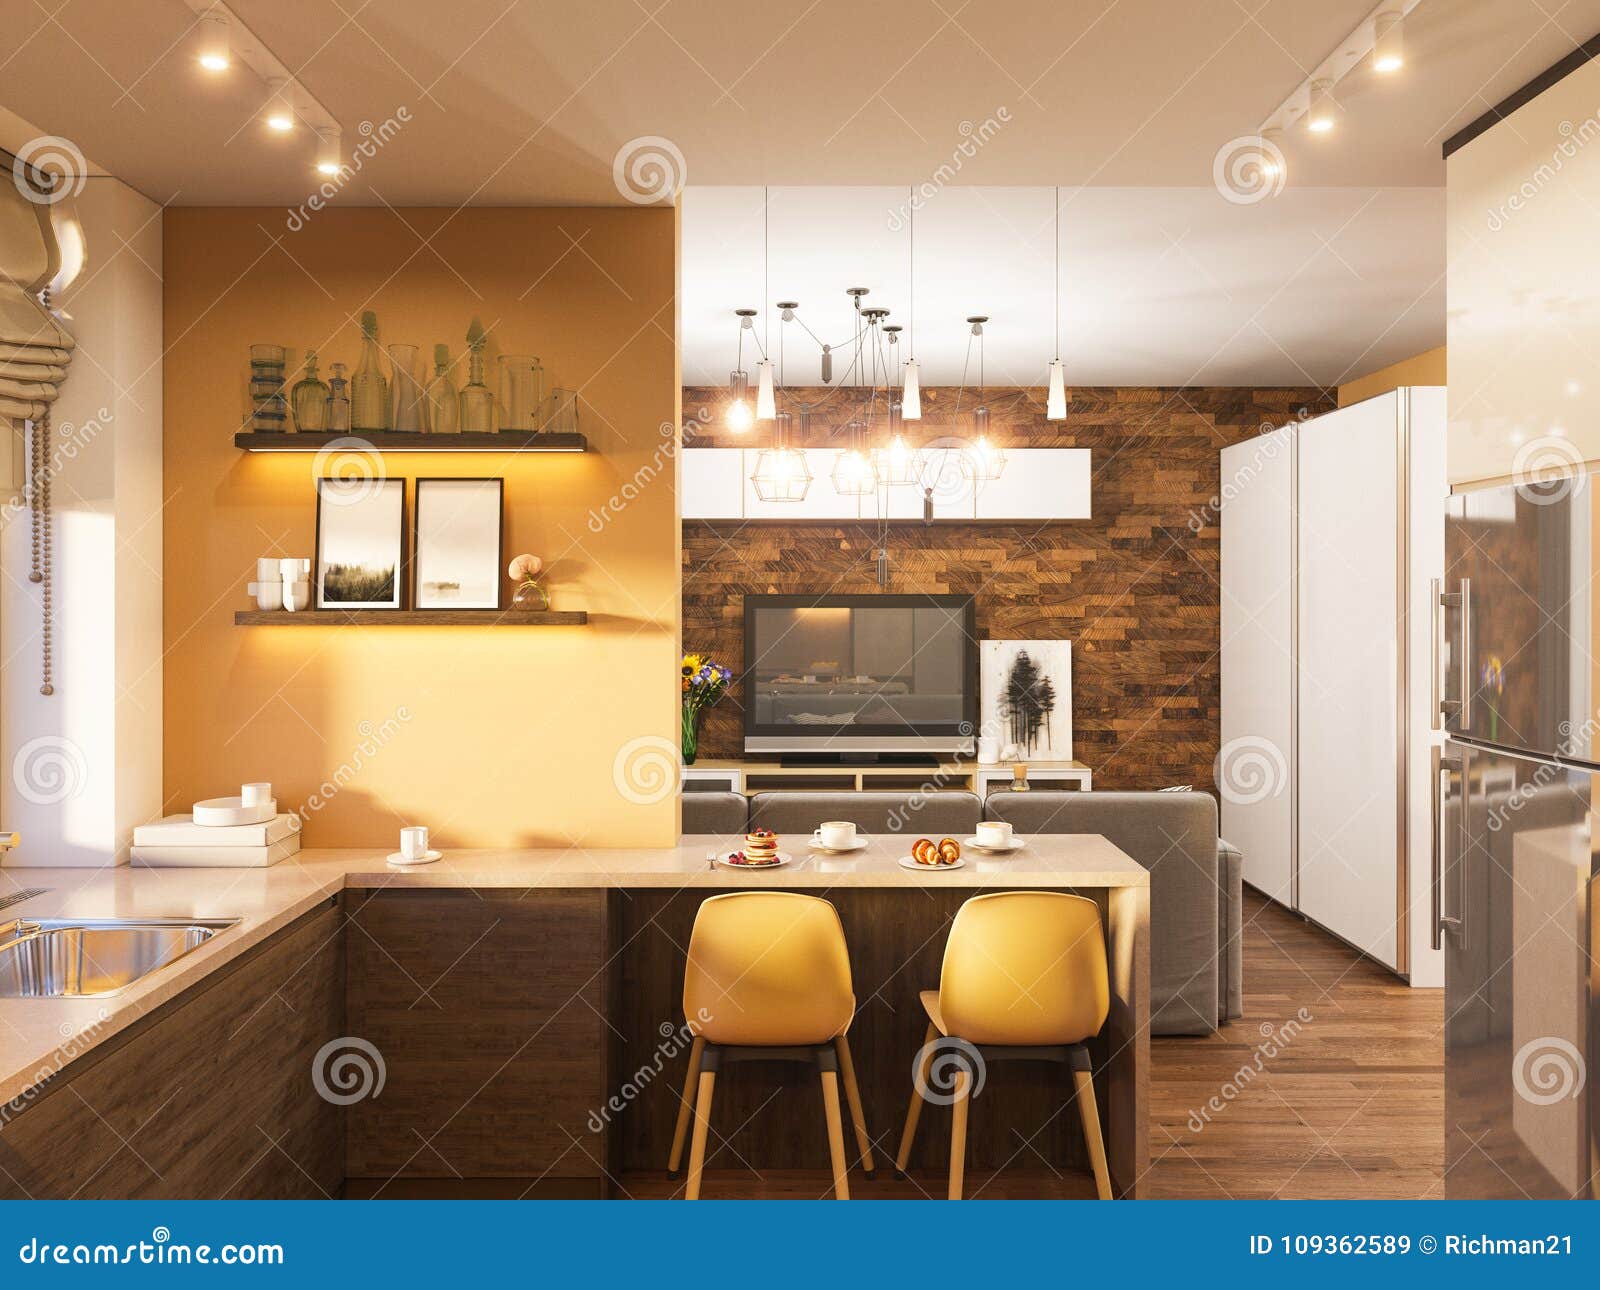 3d Illustration Of The Interior Design Of The Kitchen In A